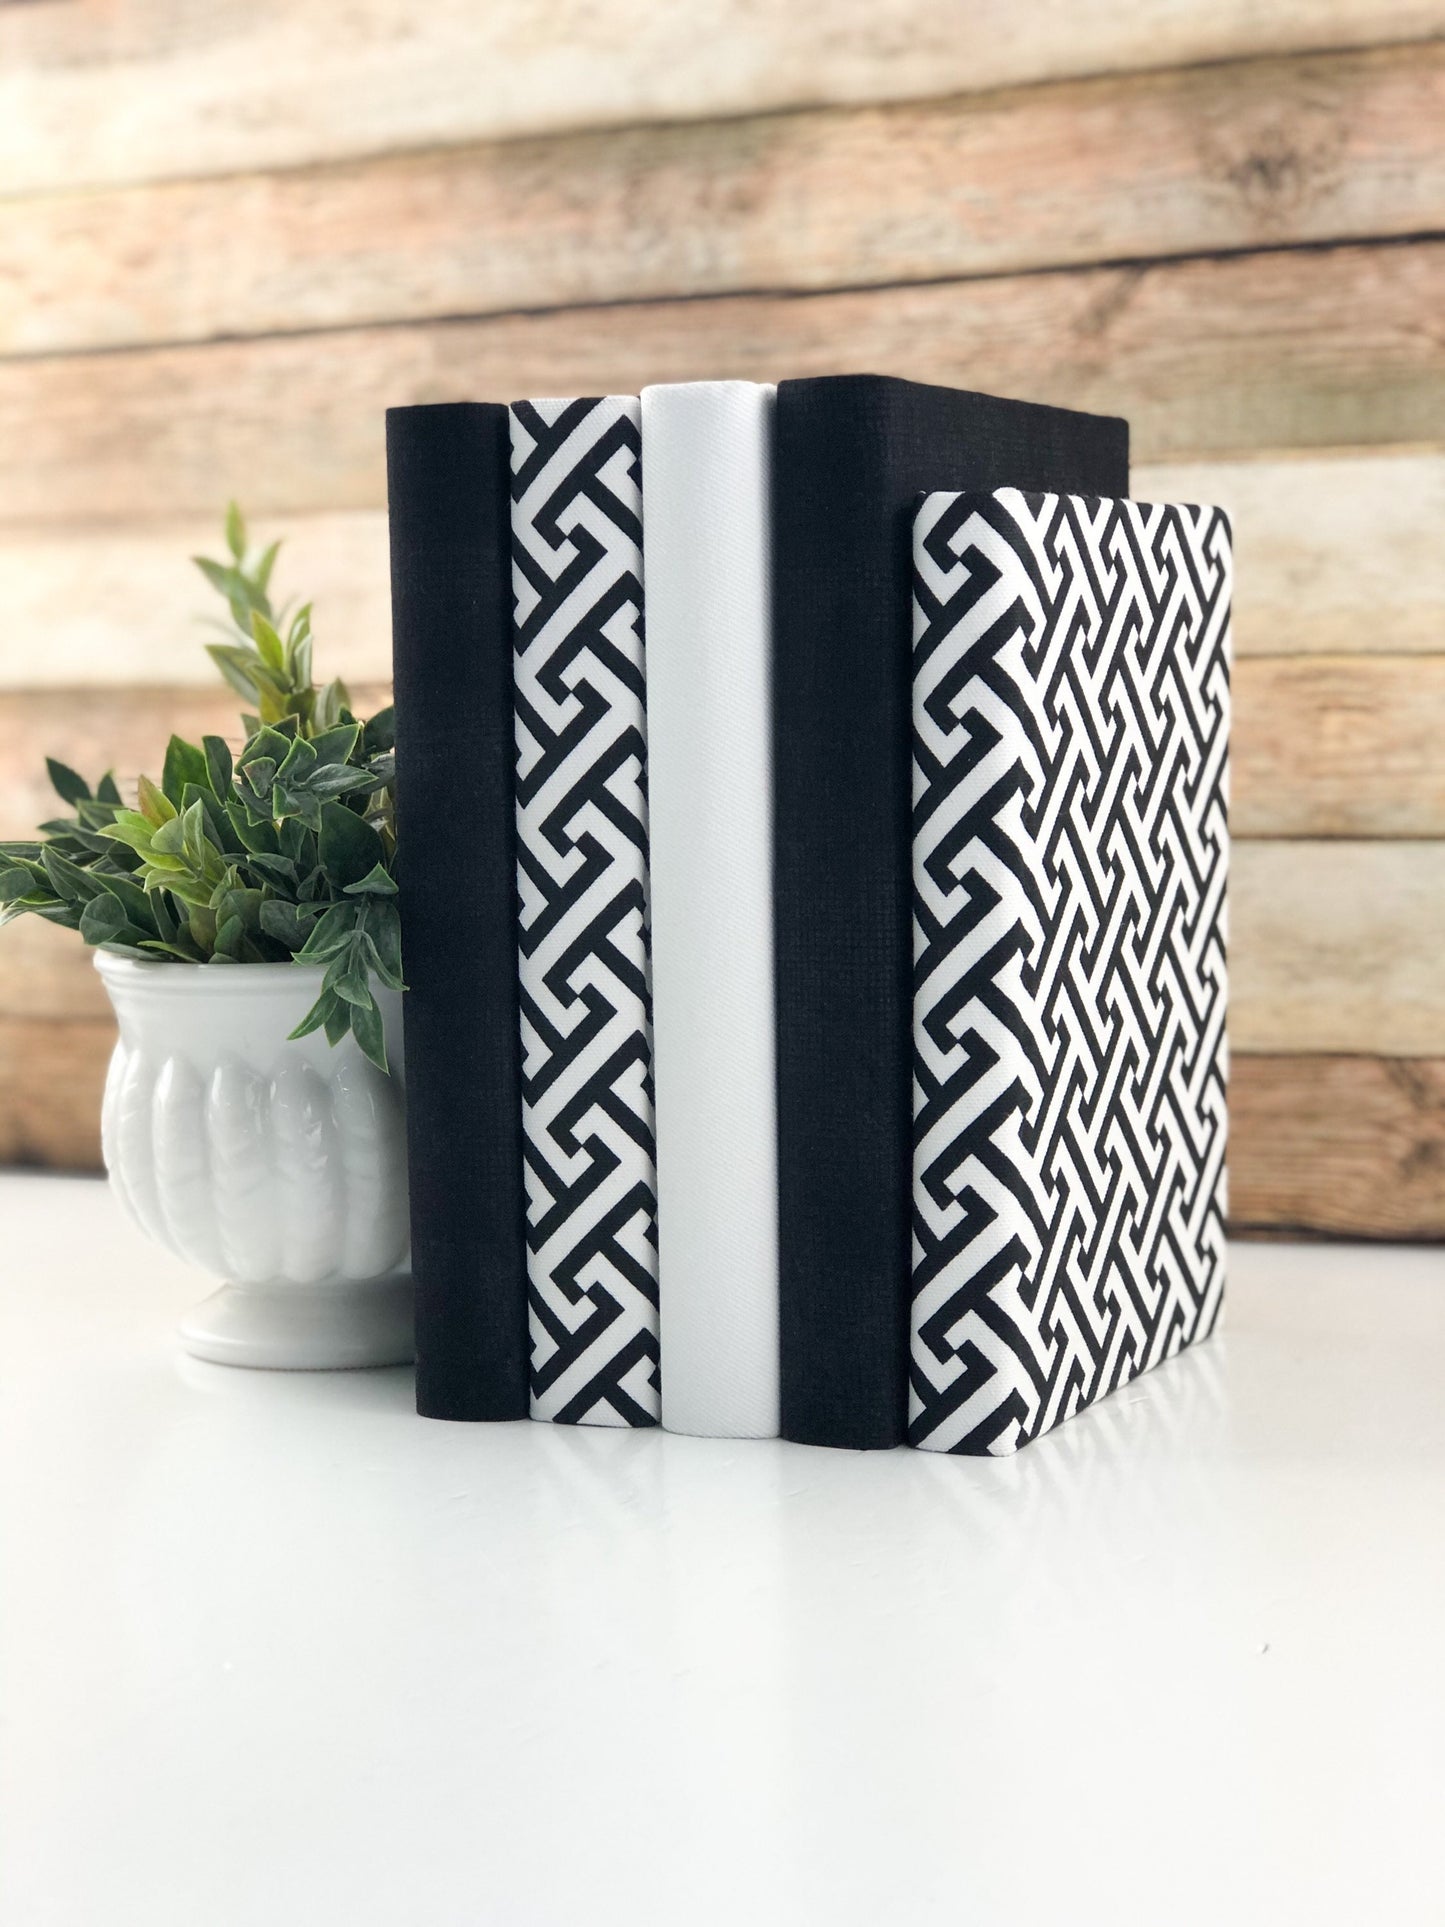 Black and White Fabric Covered Books